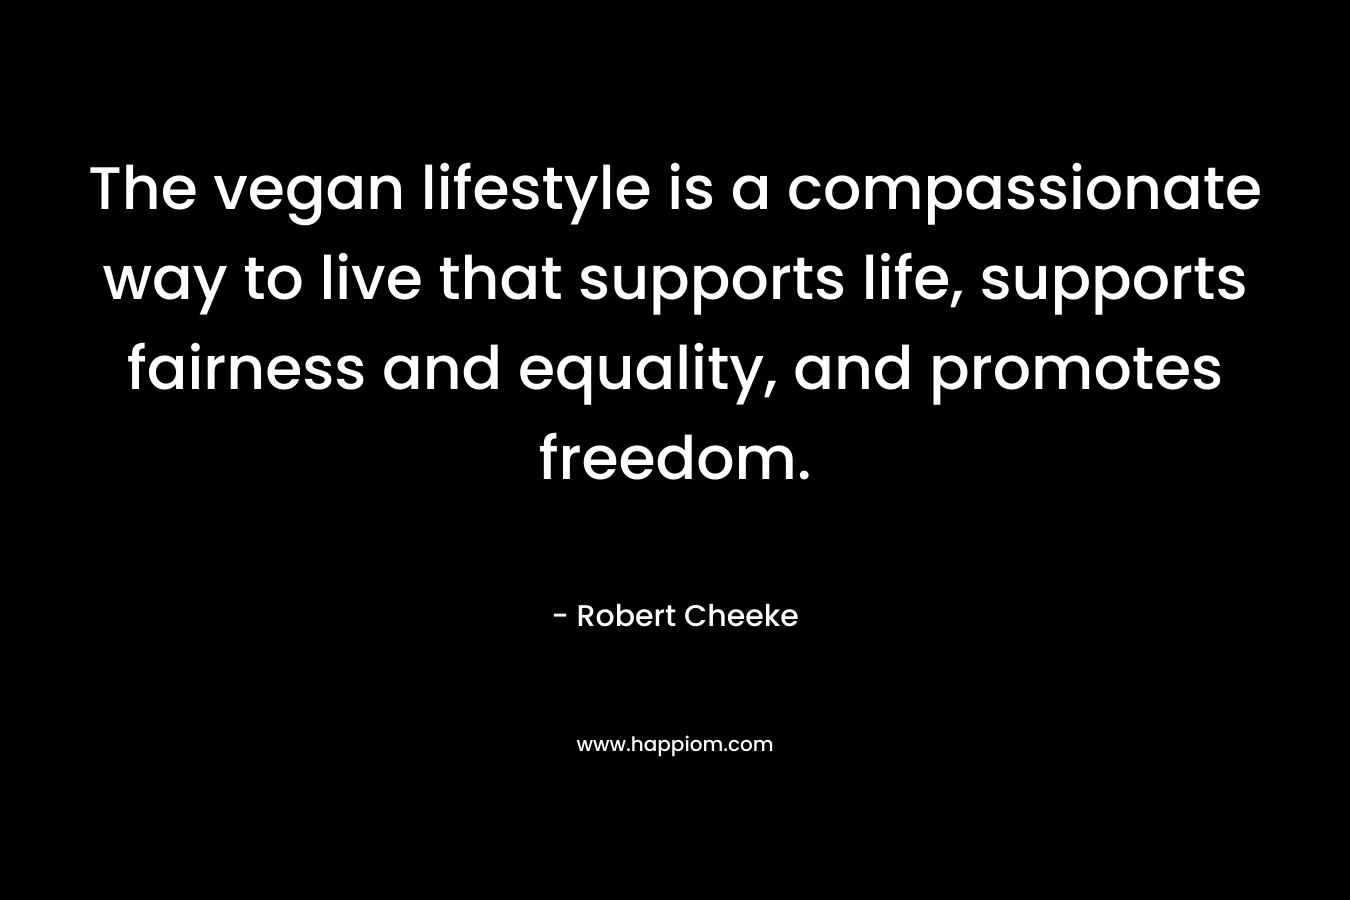 The vegan lifestyle is a compassionate way to live that supports life, supports fairness and equality, and promotes freedom. – Robert Cheeke